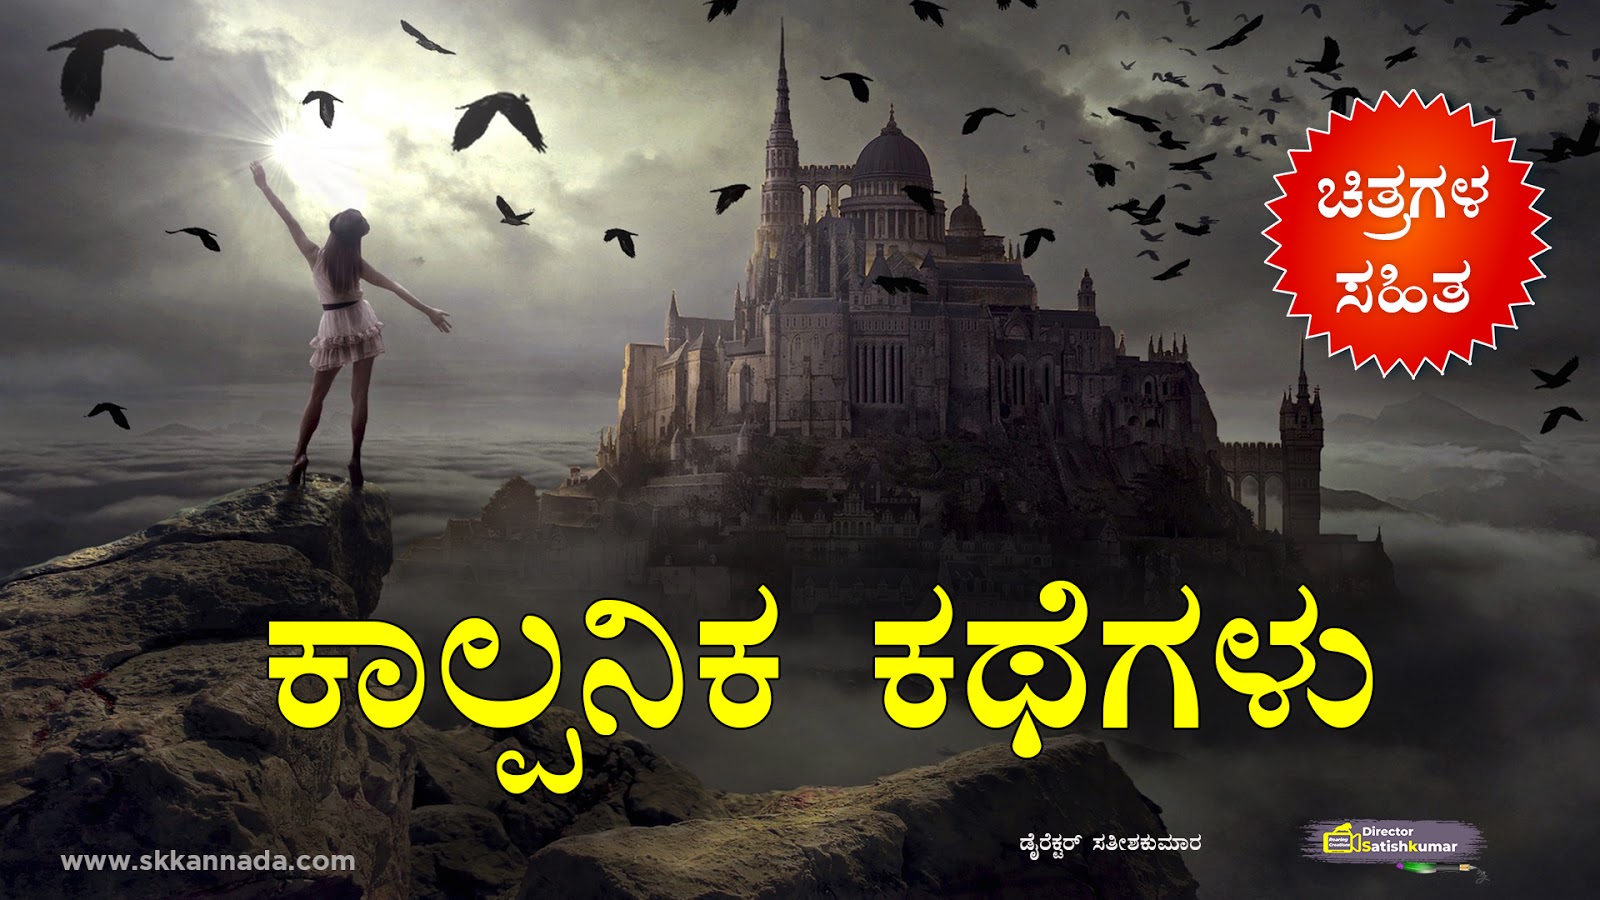 You are currently viewing ಕನ್ನಡ ಕಾಲ್ಪನಿಕ ಕಥೆಗಳು – Kannada Fairy Tales